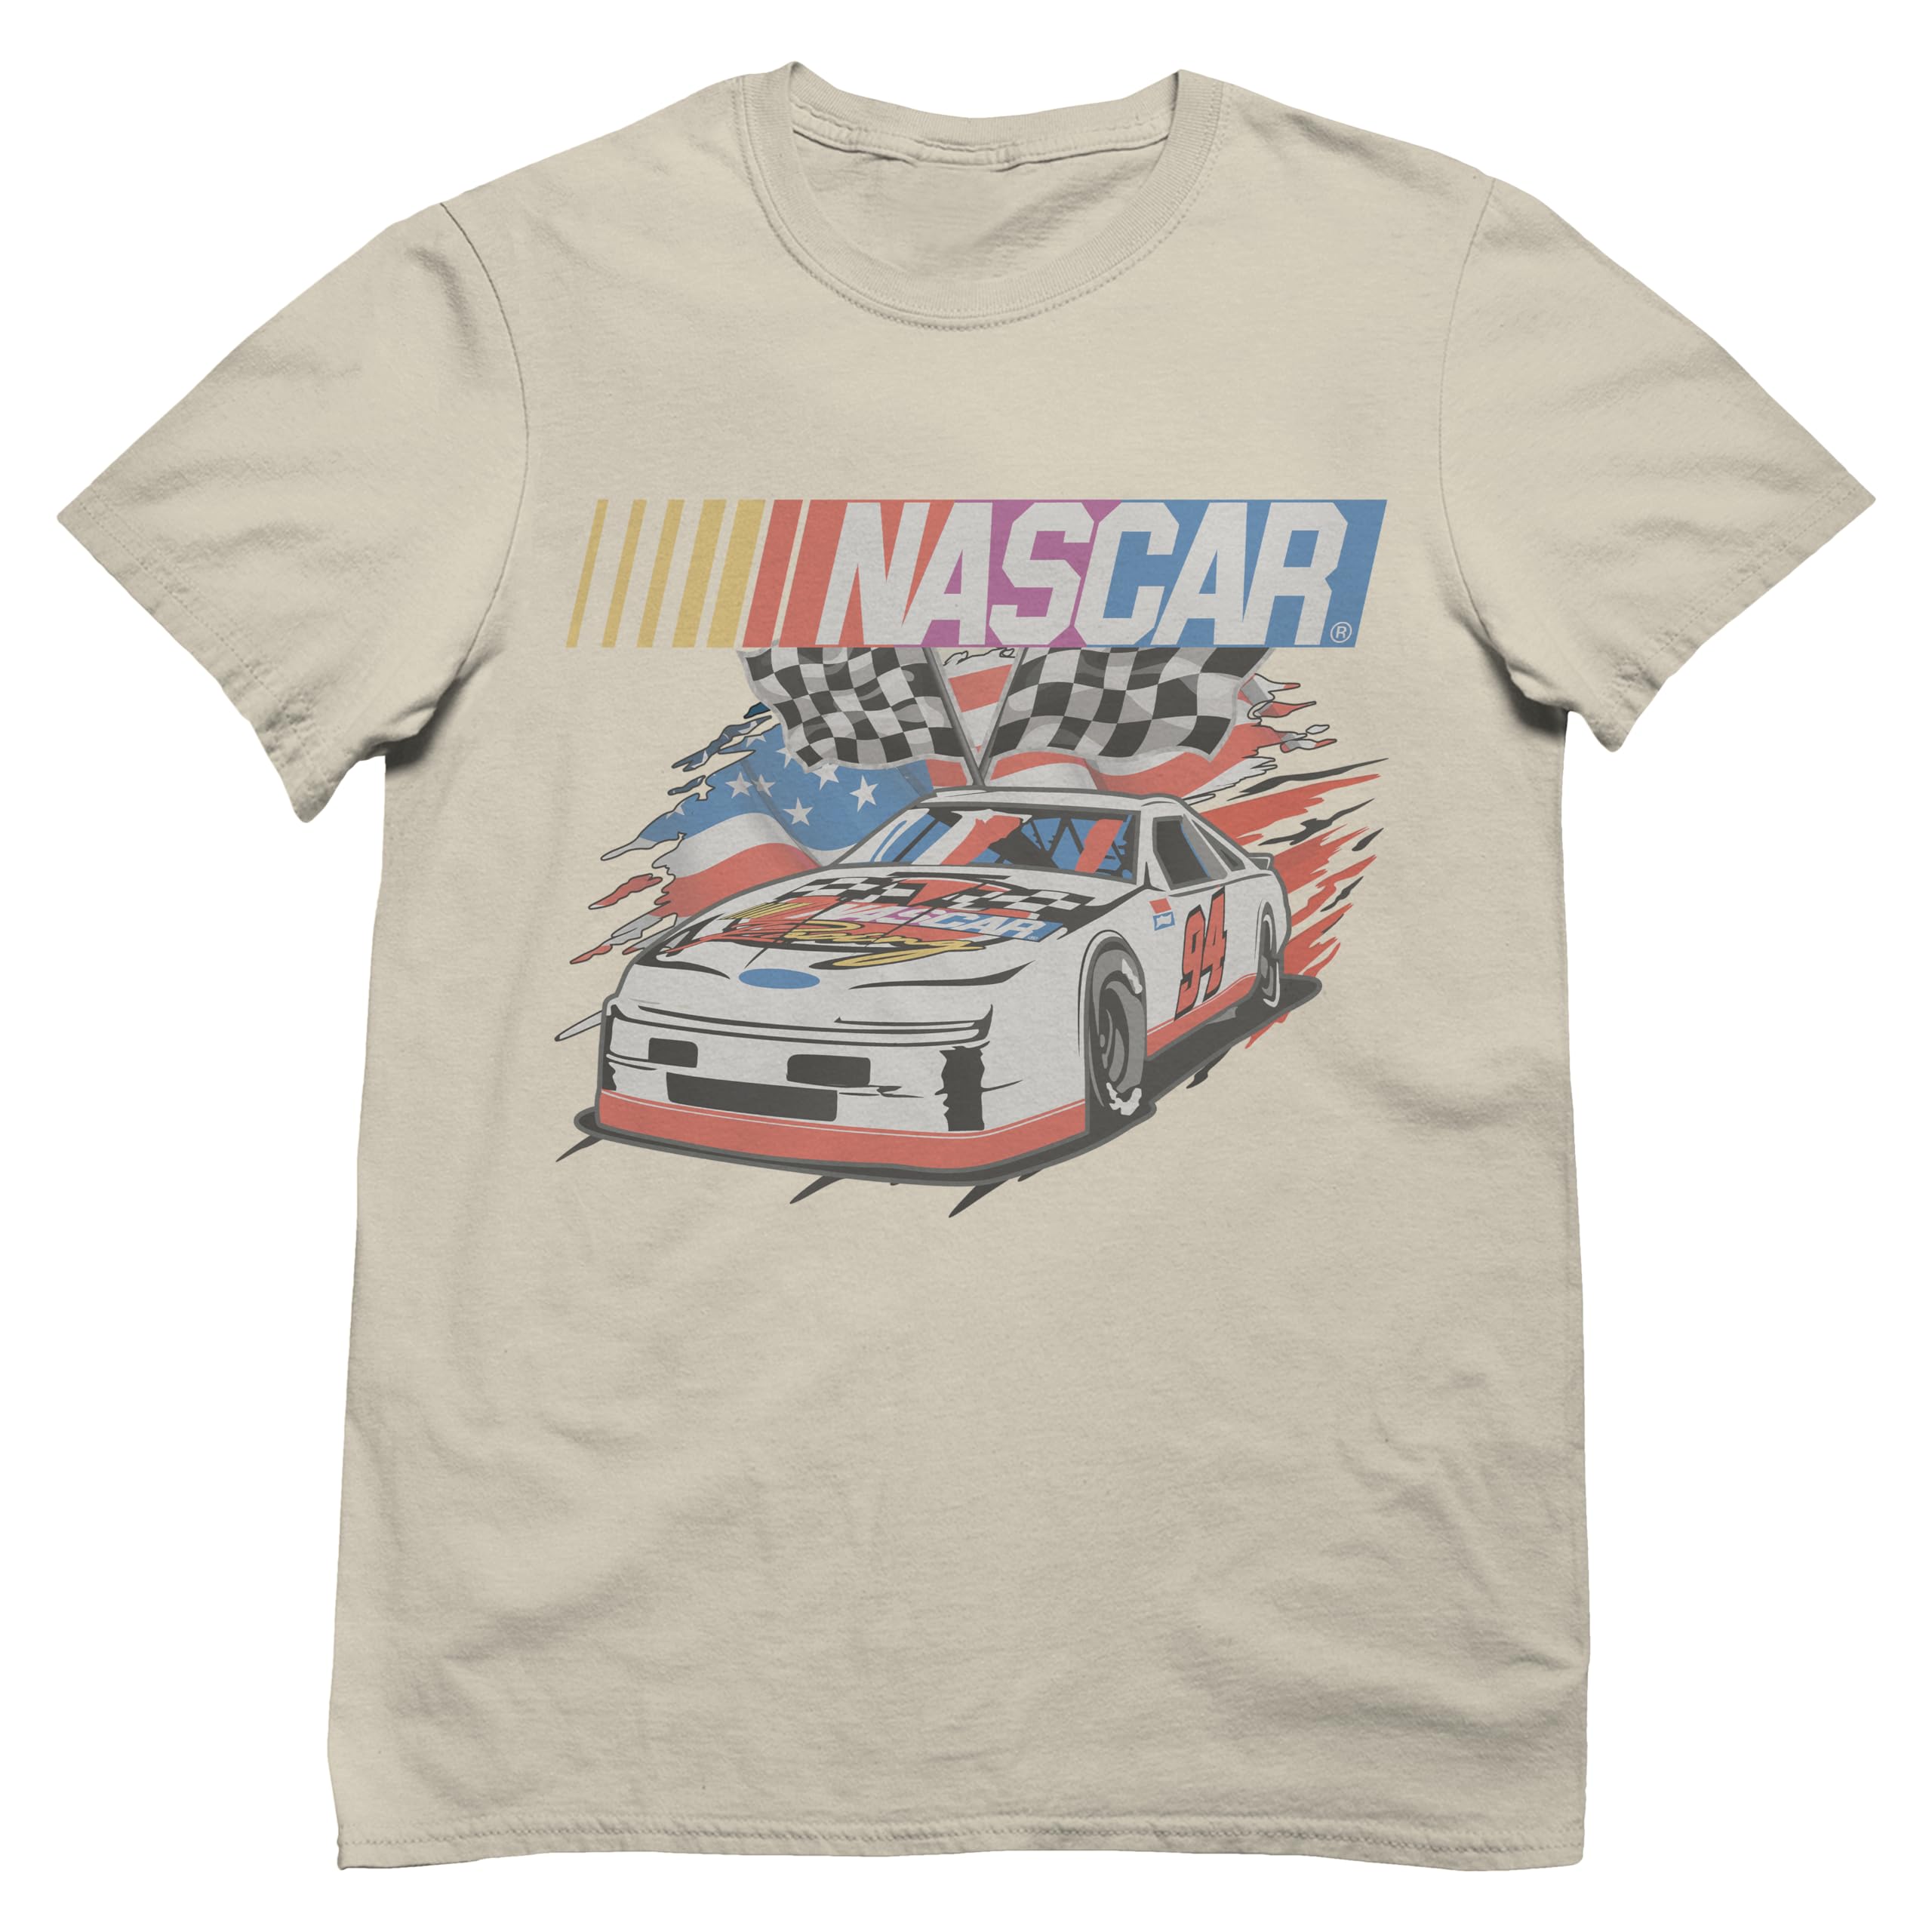 NASCAR American Pride Car 94 Racing Flags Distressed Men's and Women's Short Sleeve Unisex T-Shirt (Beige, X-Large)